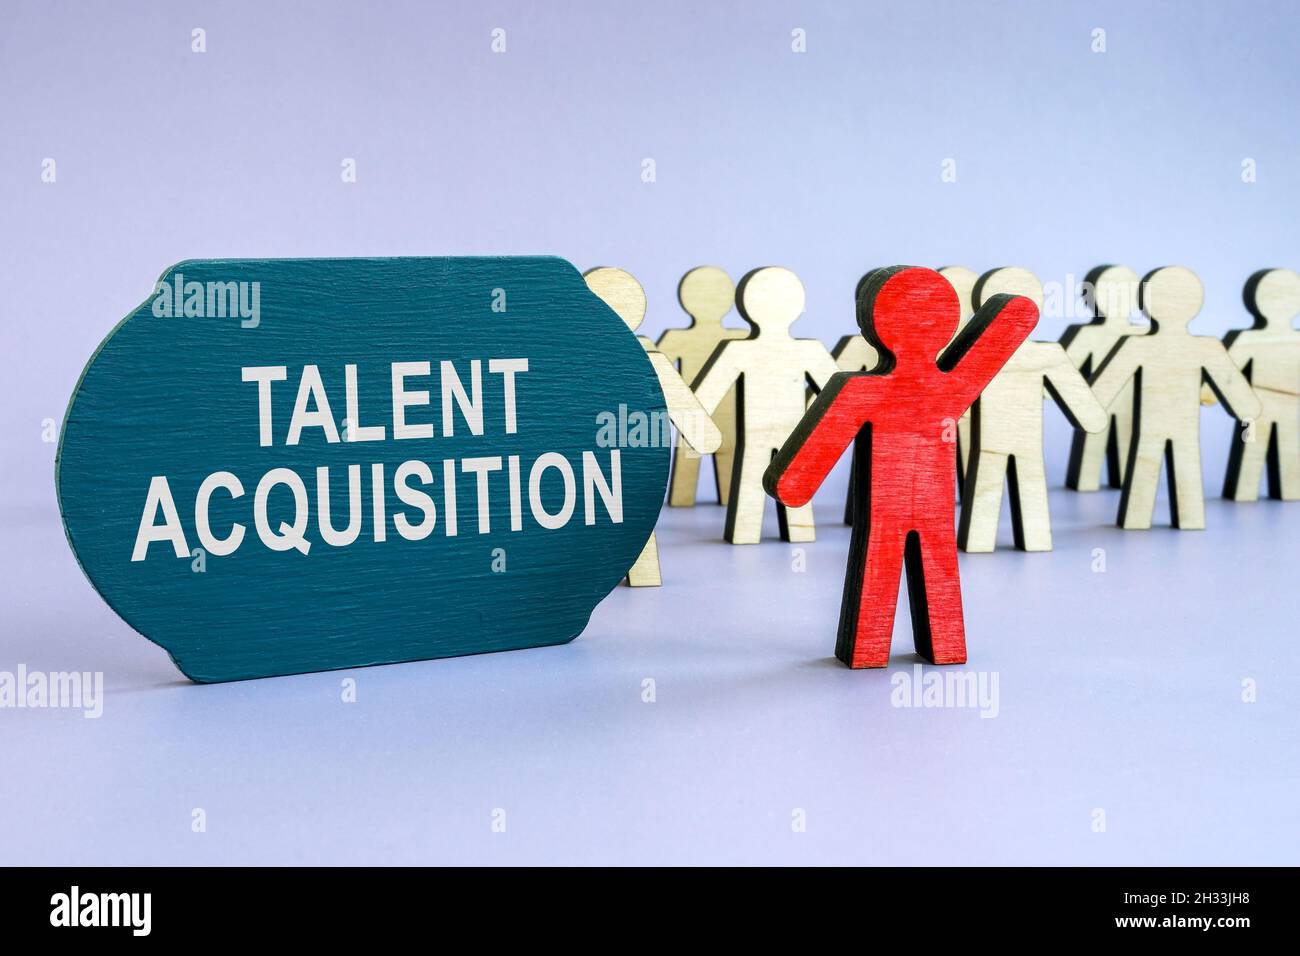 Talent acquisition written on dark plate and wooden figurines. Stock Photo